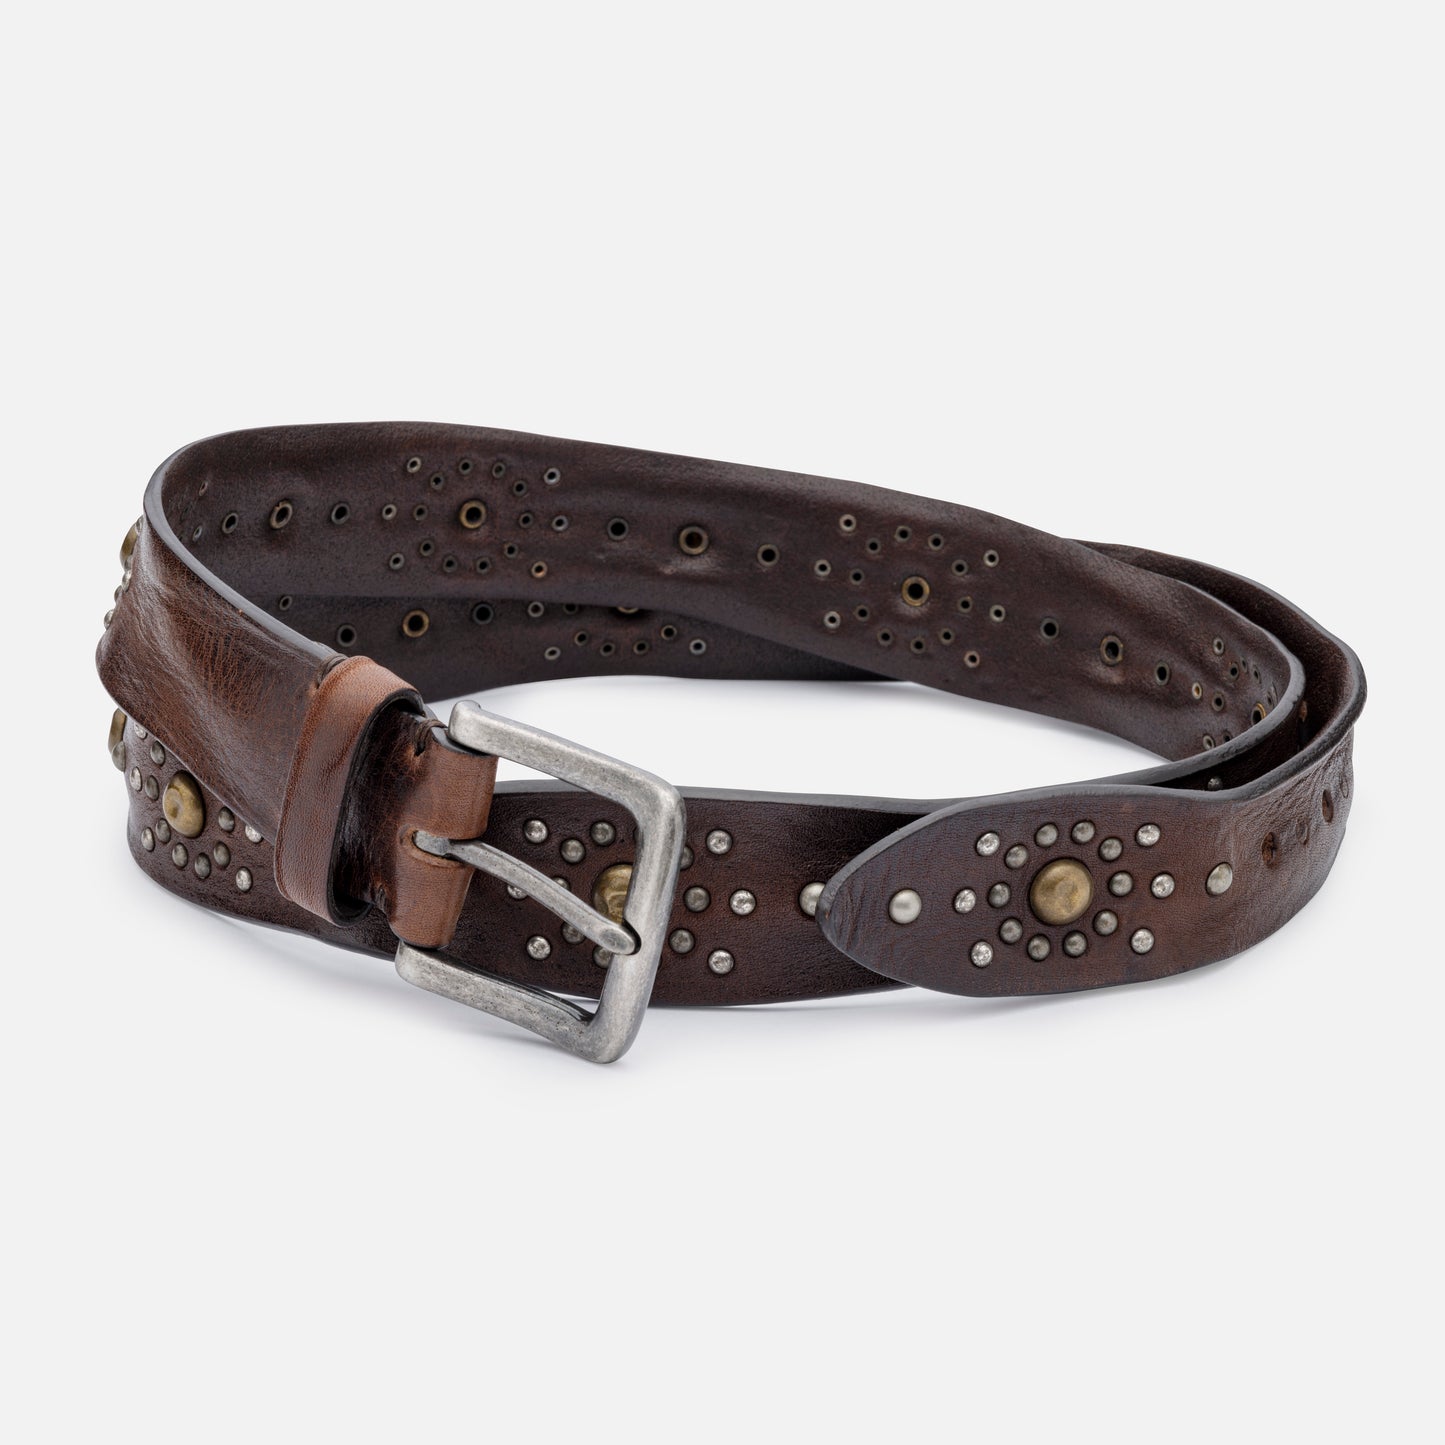 VINTAGE DARK BROWN LEATHER BELTS WITH STUDS AND ENGLISH SILVER BUCKLE  H 3,5cm